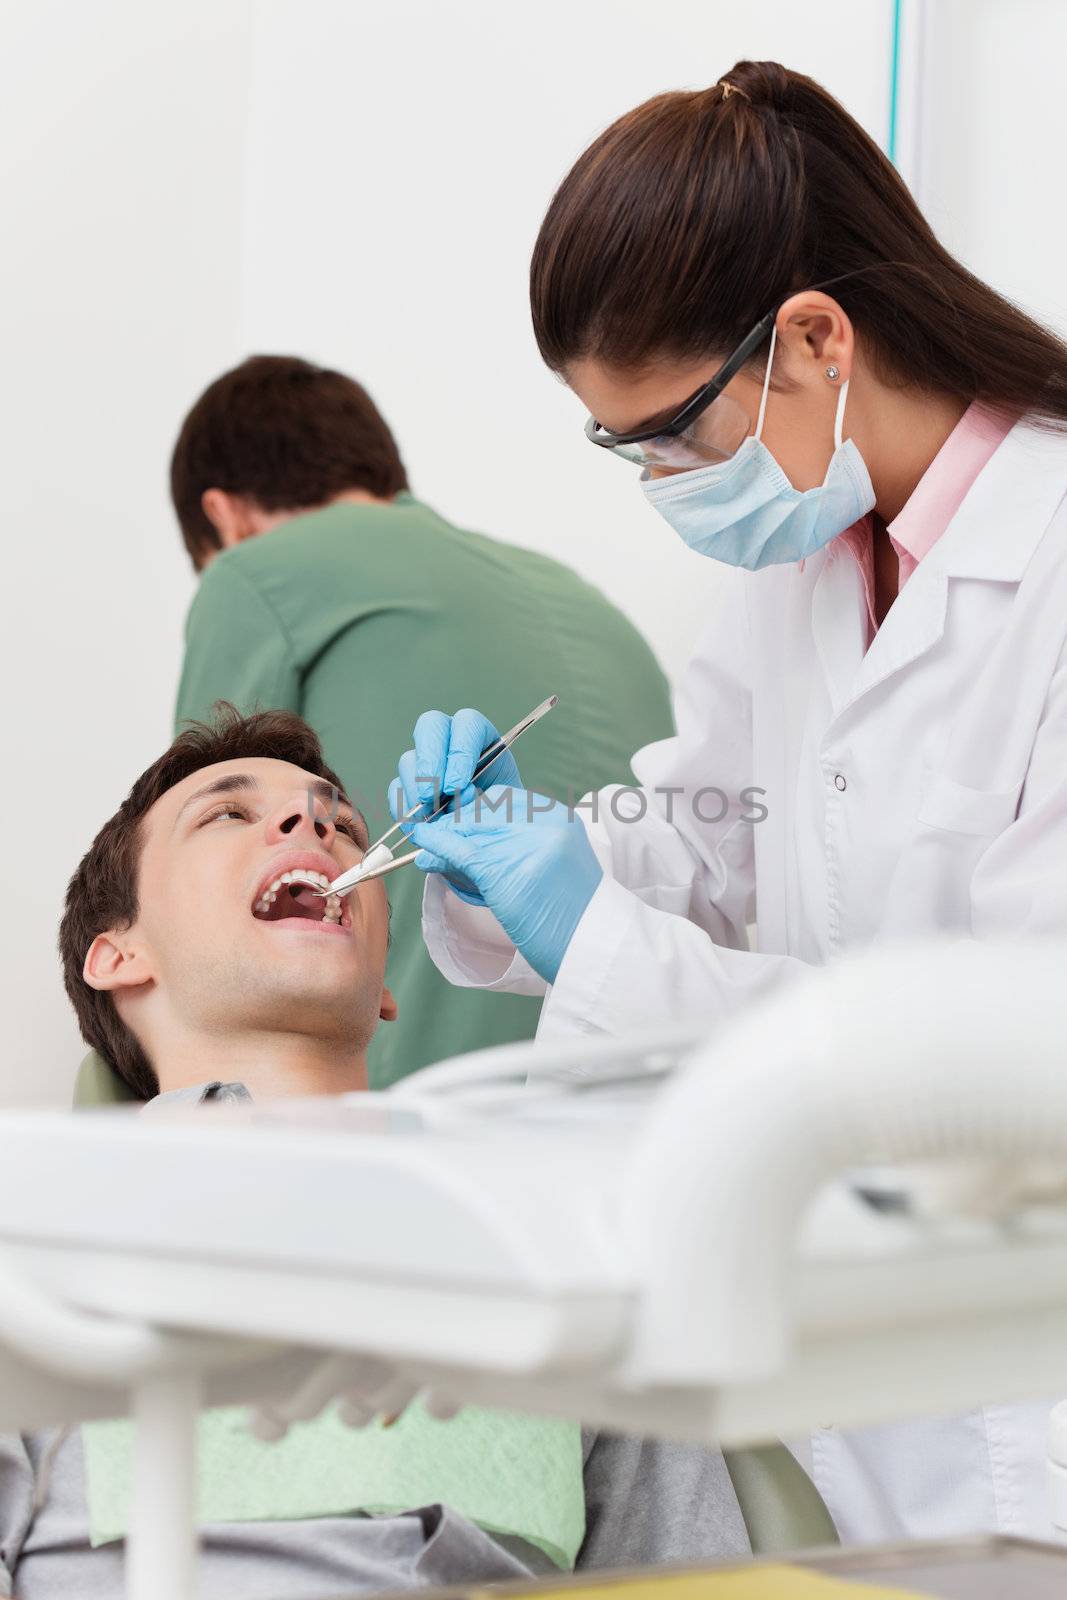 Young female dentist working on patient's teeth with assistant in the background